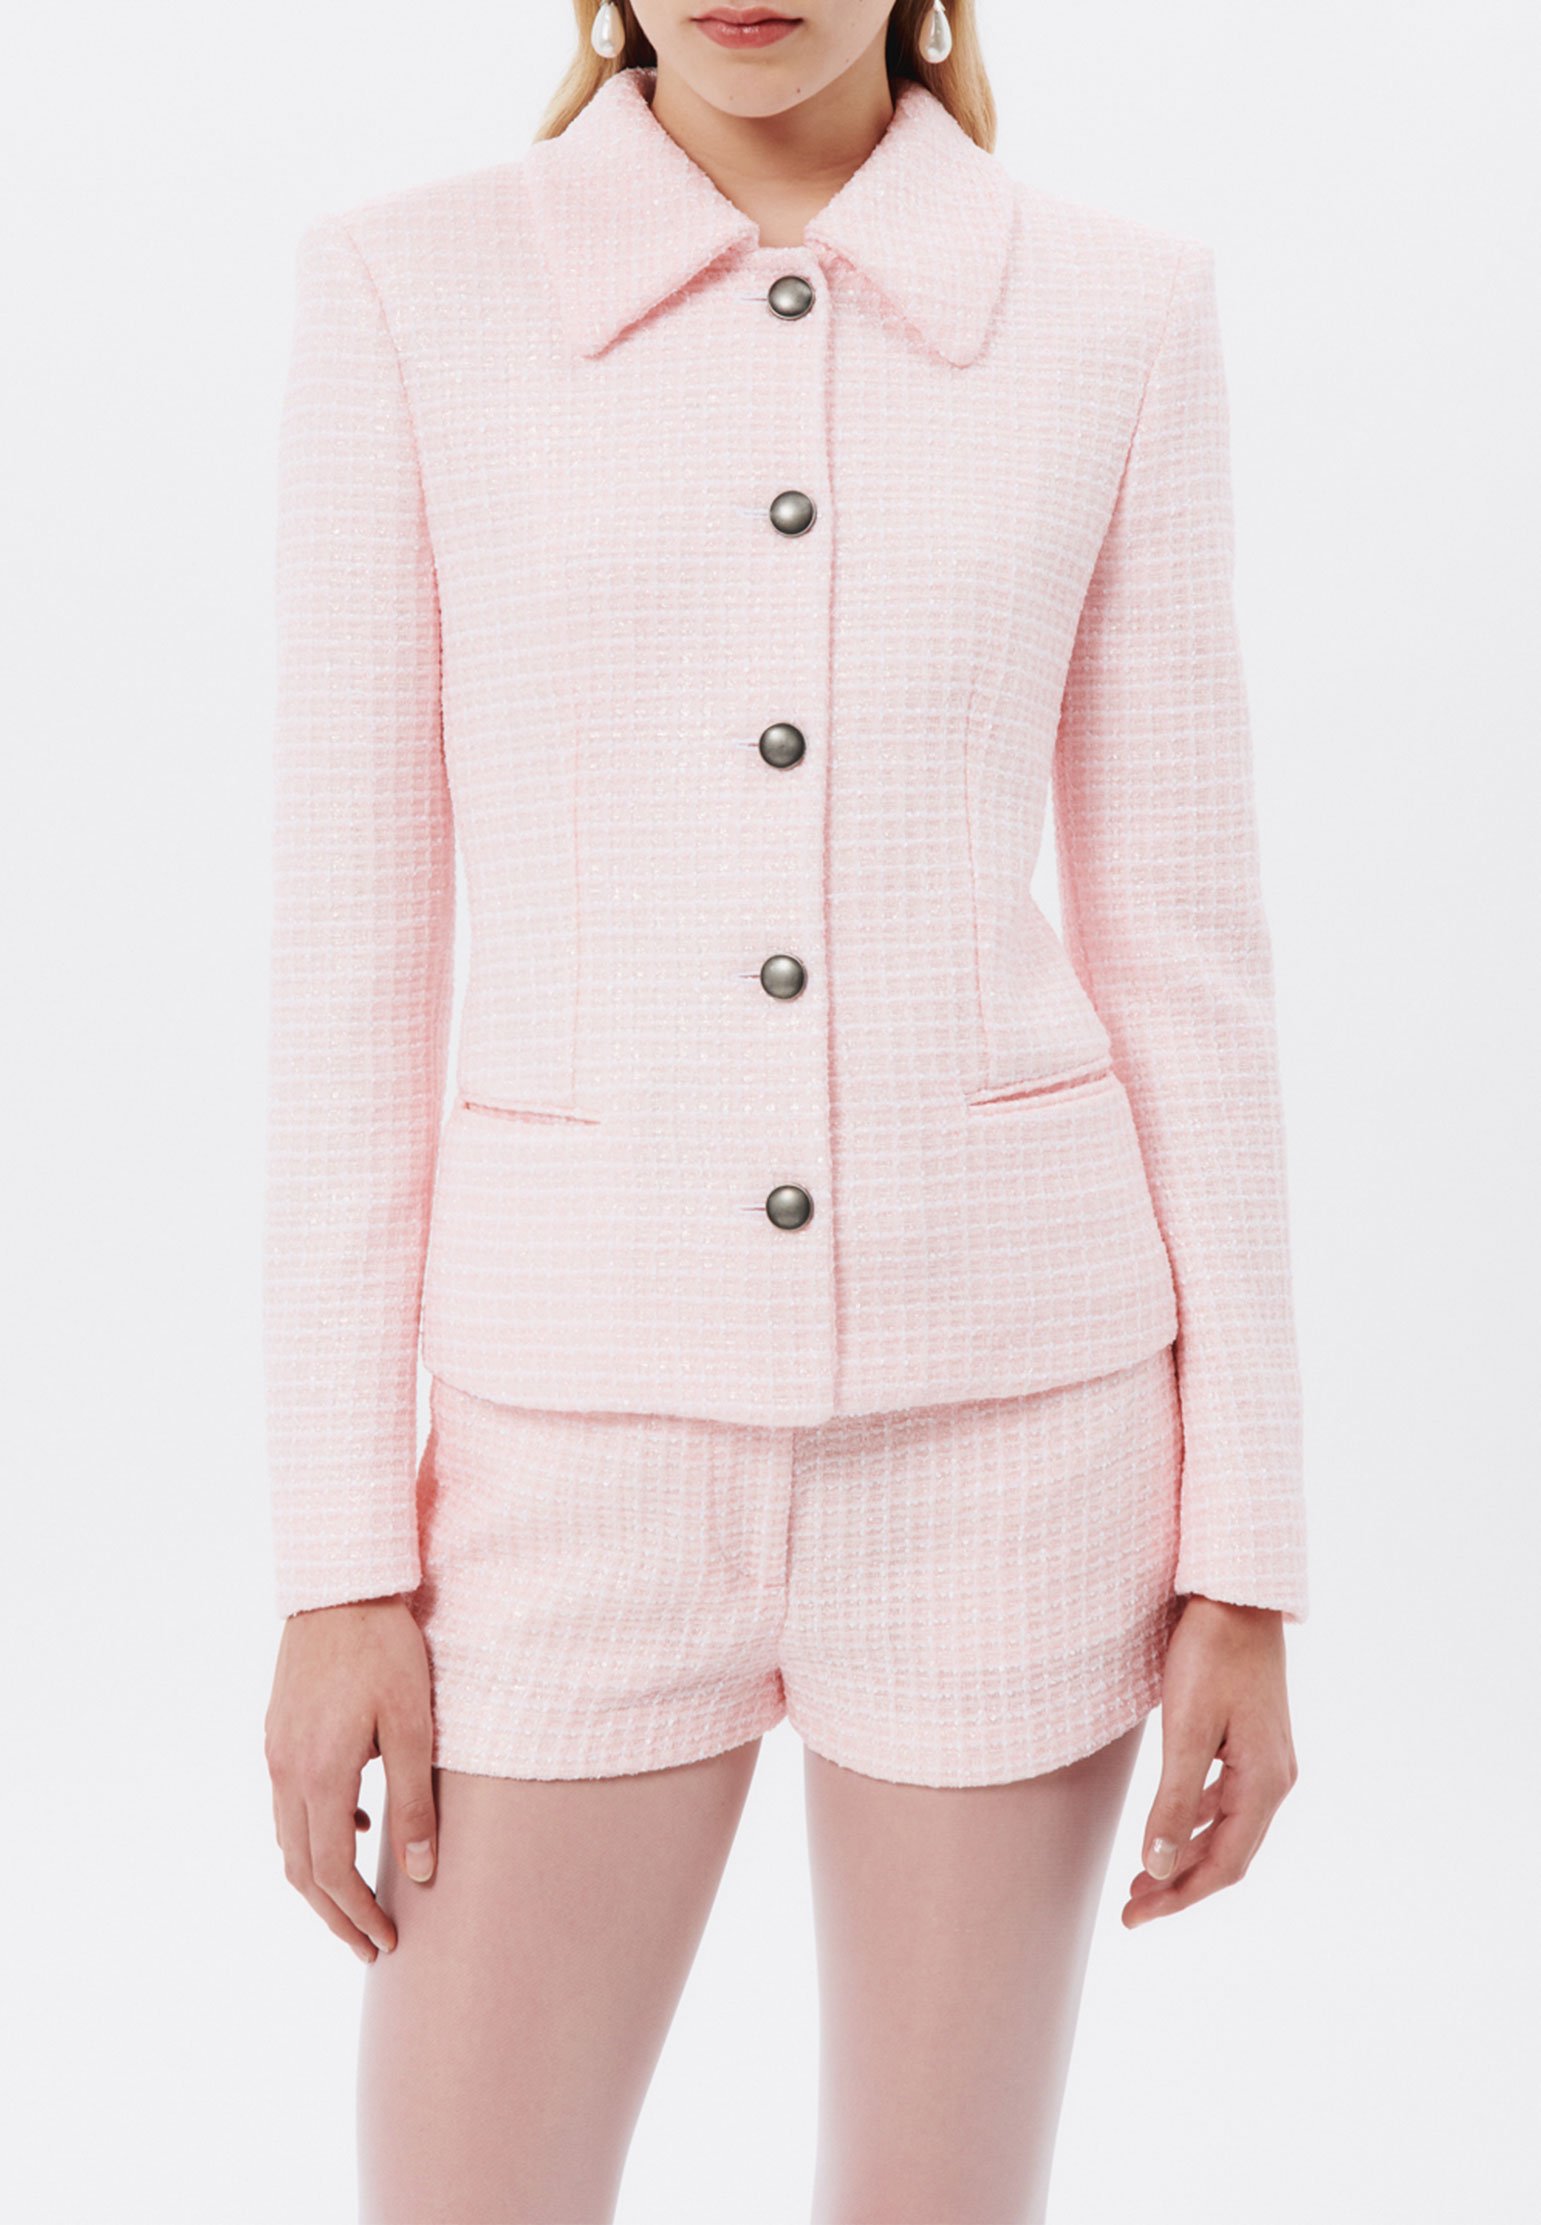 Jacket ALESSANDRA RICH Color: pink (Code: 3725) in online store Allure